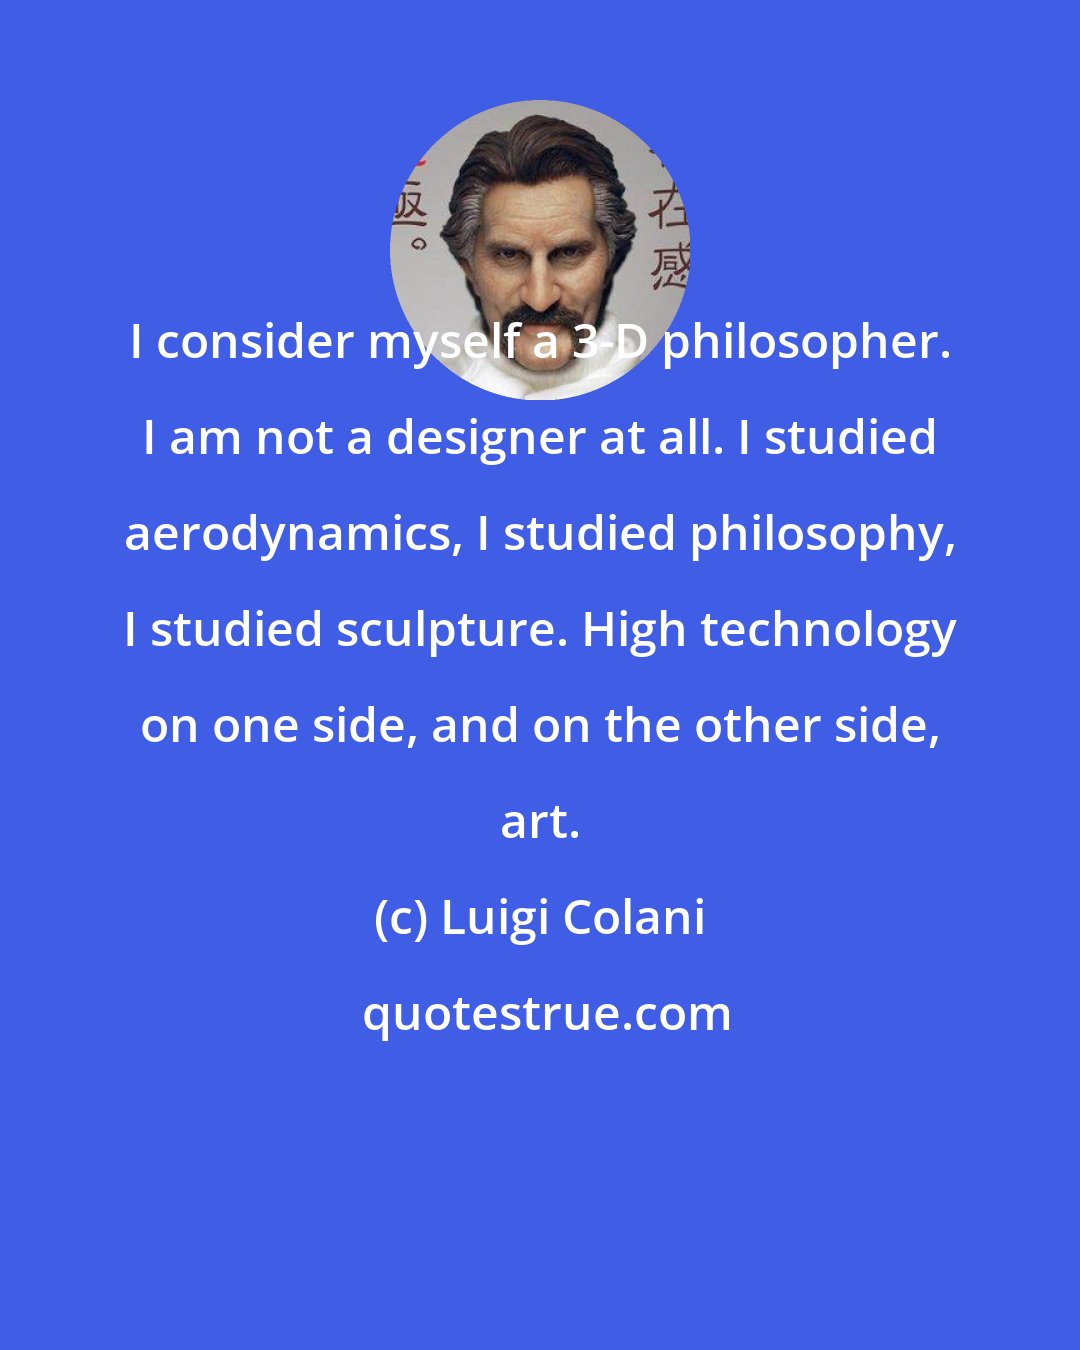 Luigi Colani: I consider myself a 3-D philosopher. I am not a designer at all. I studied aerodynamics, I studied philosophy, I studied sculpture. High technology on one side, and on the other side, art.